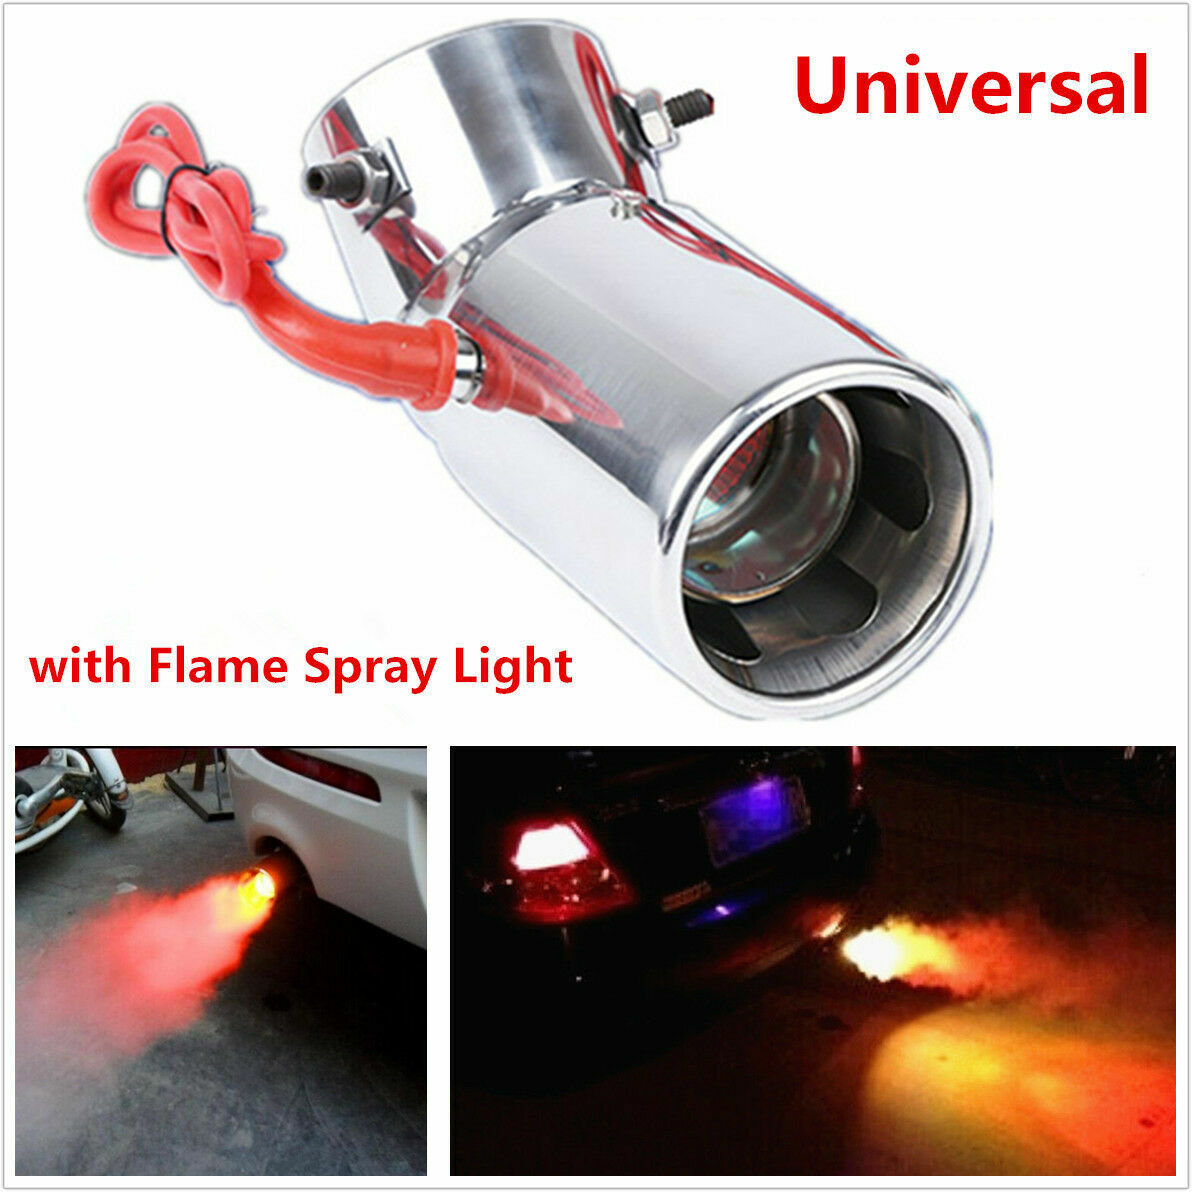 Universal Car LED Exhaust Pipe Spitfire Red Light Flaming Muffler Tip Pipe Tail